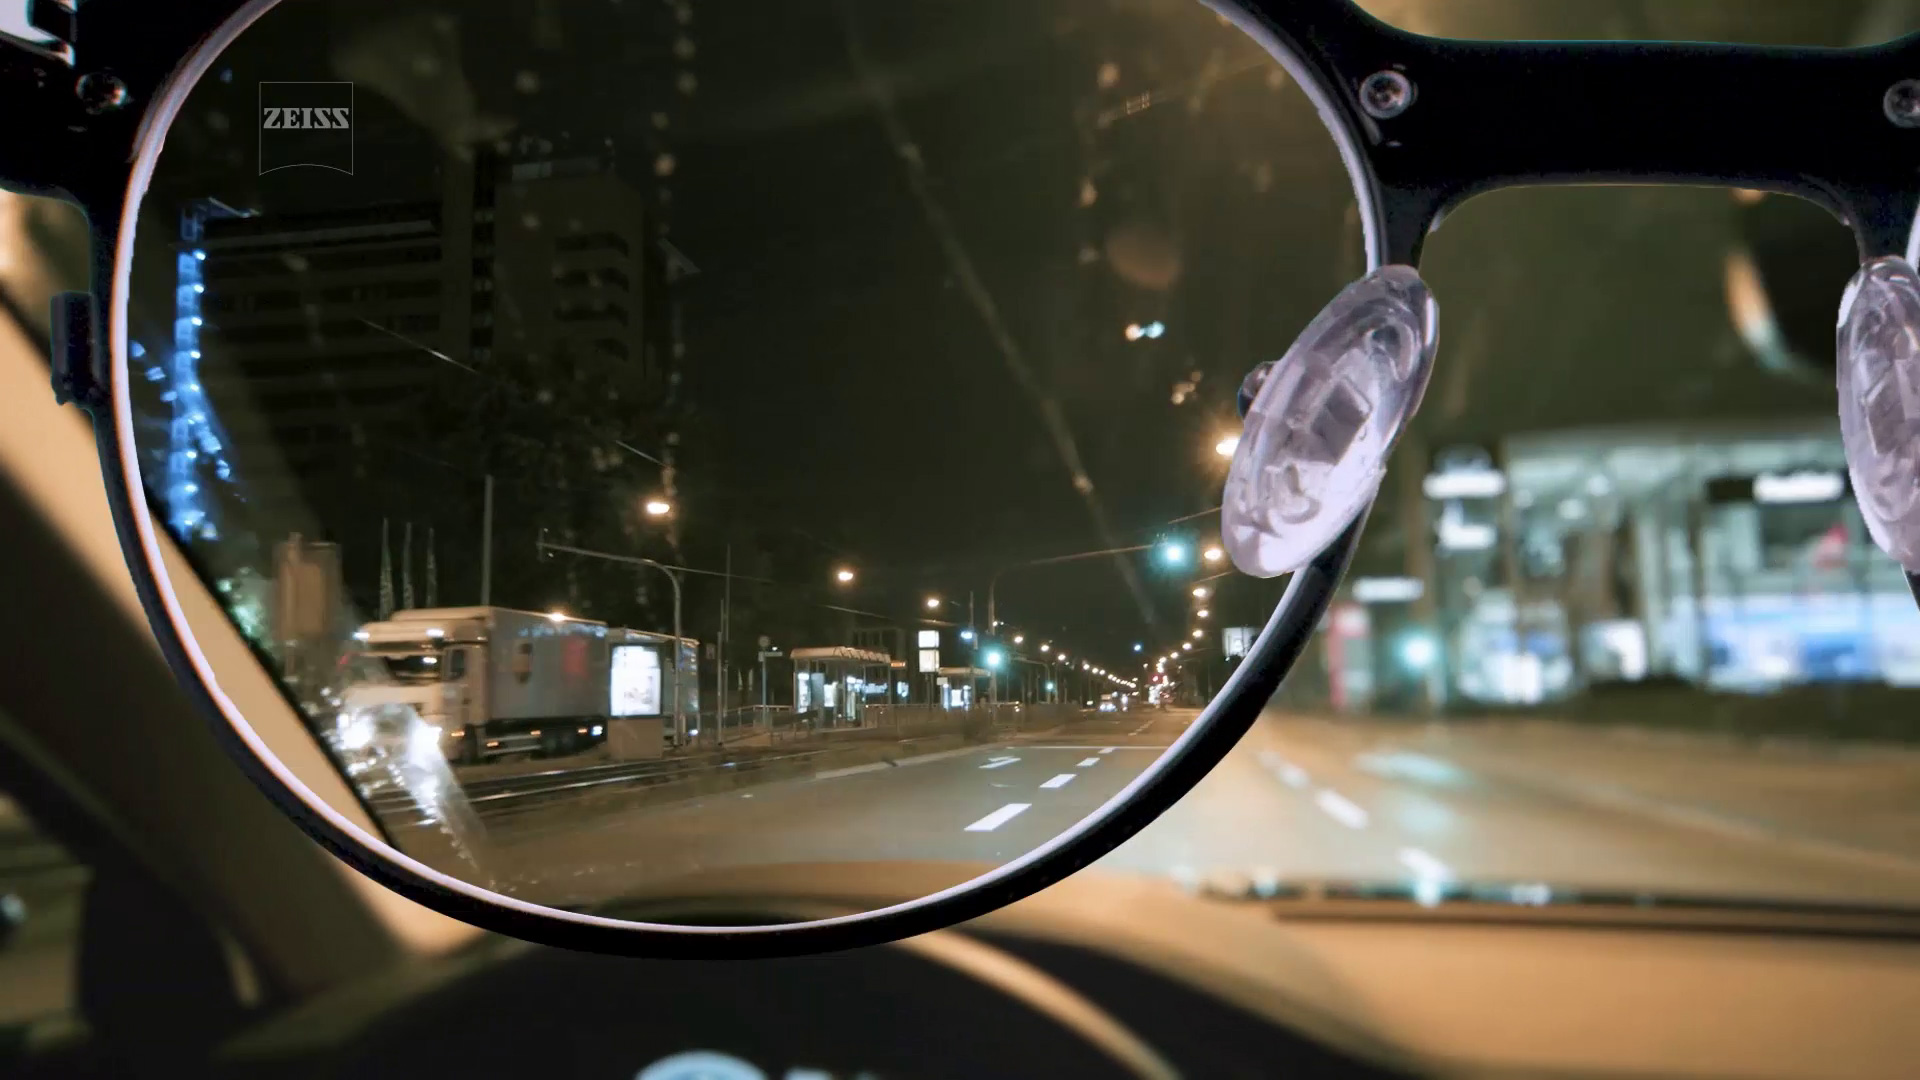 Developing Spectacle Lenses for Driving